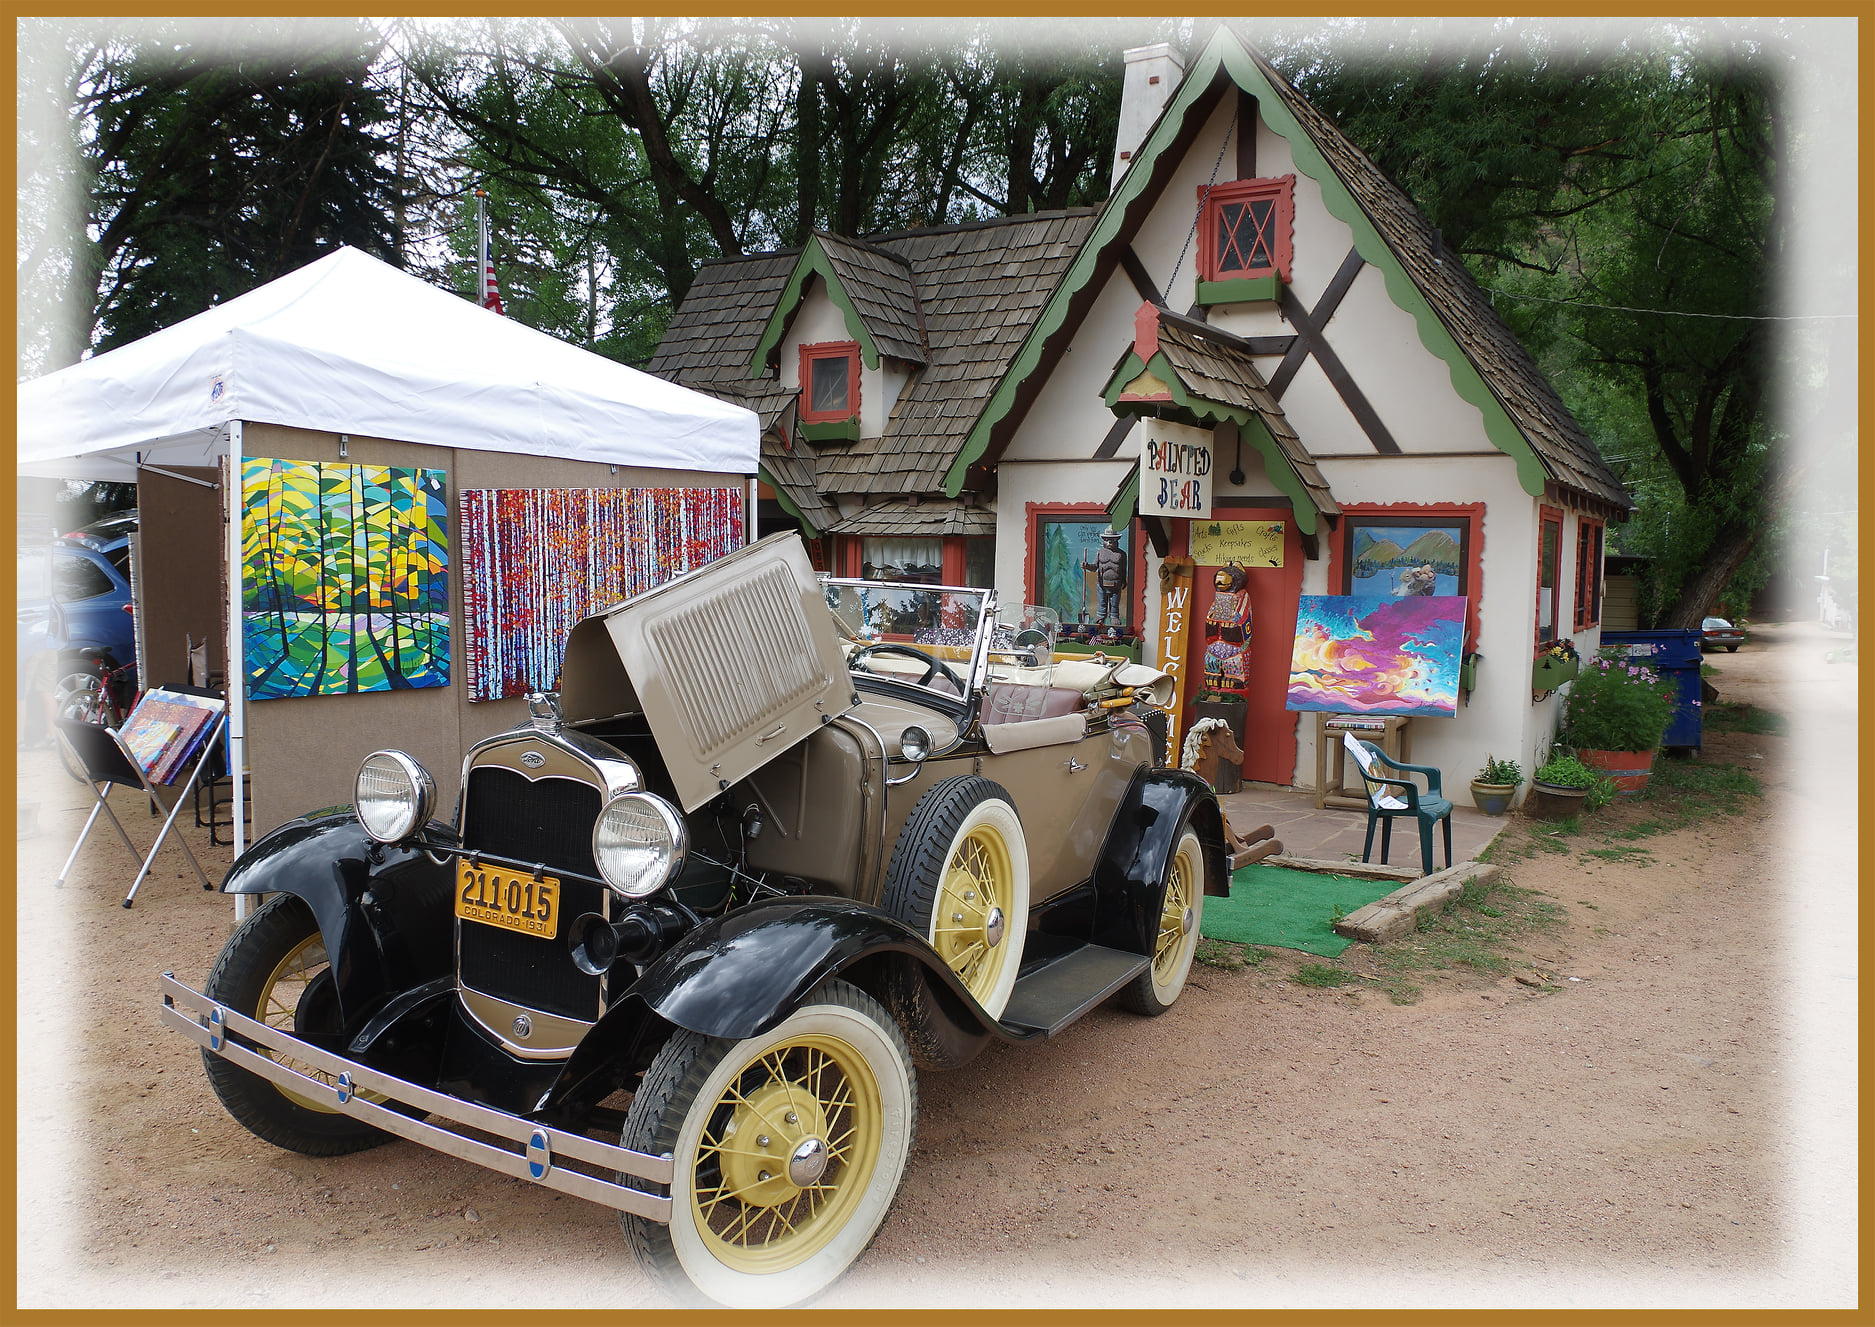 Painted Bear Store with antique car